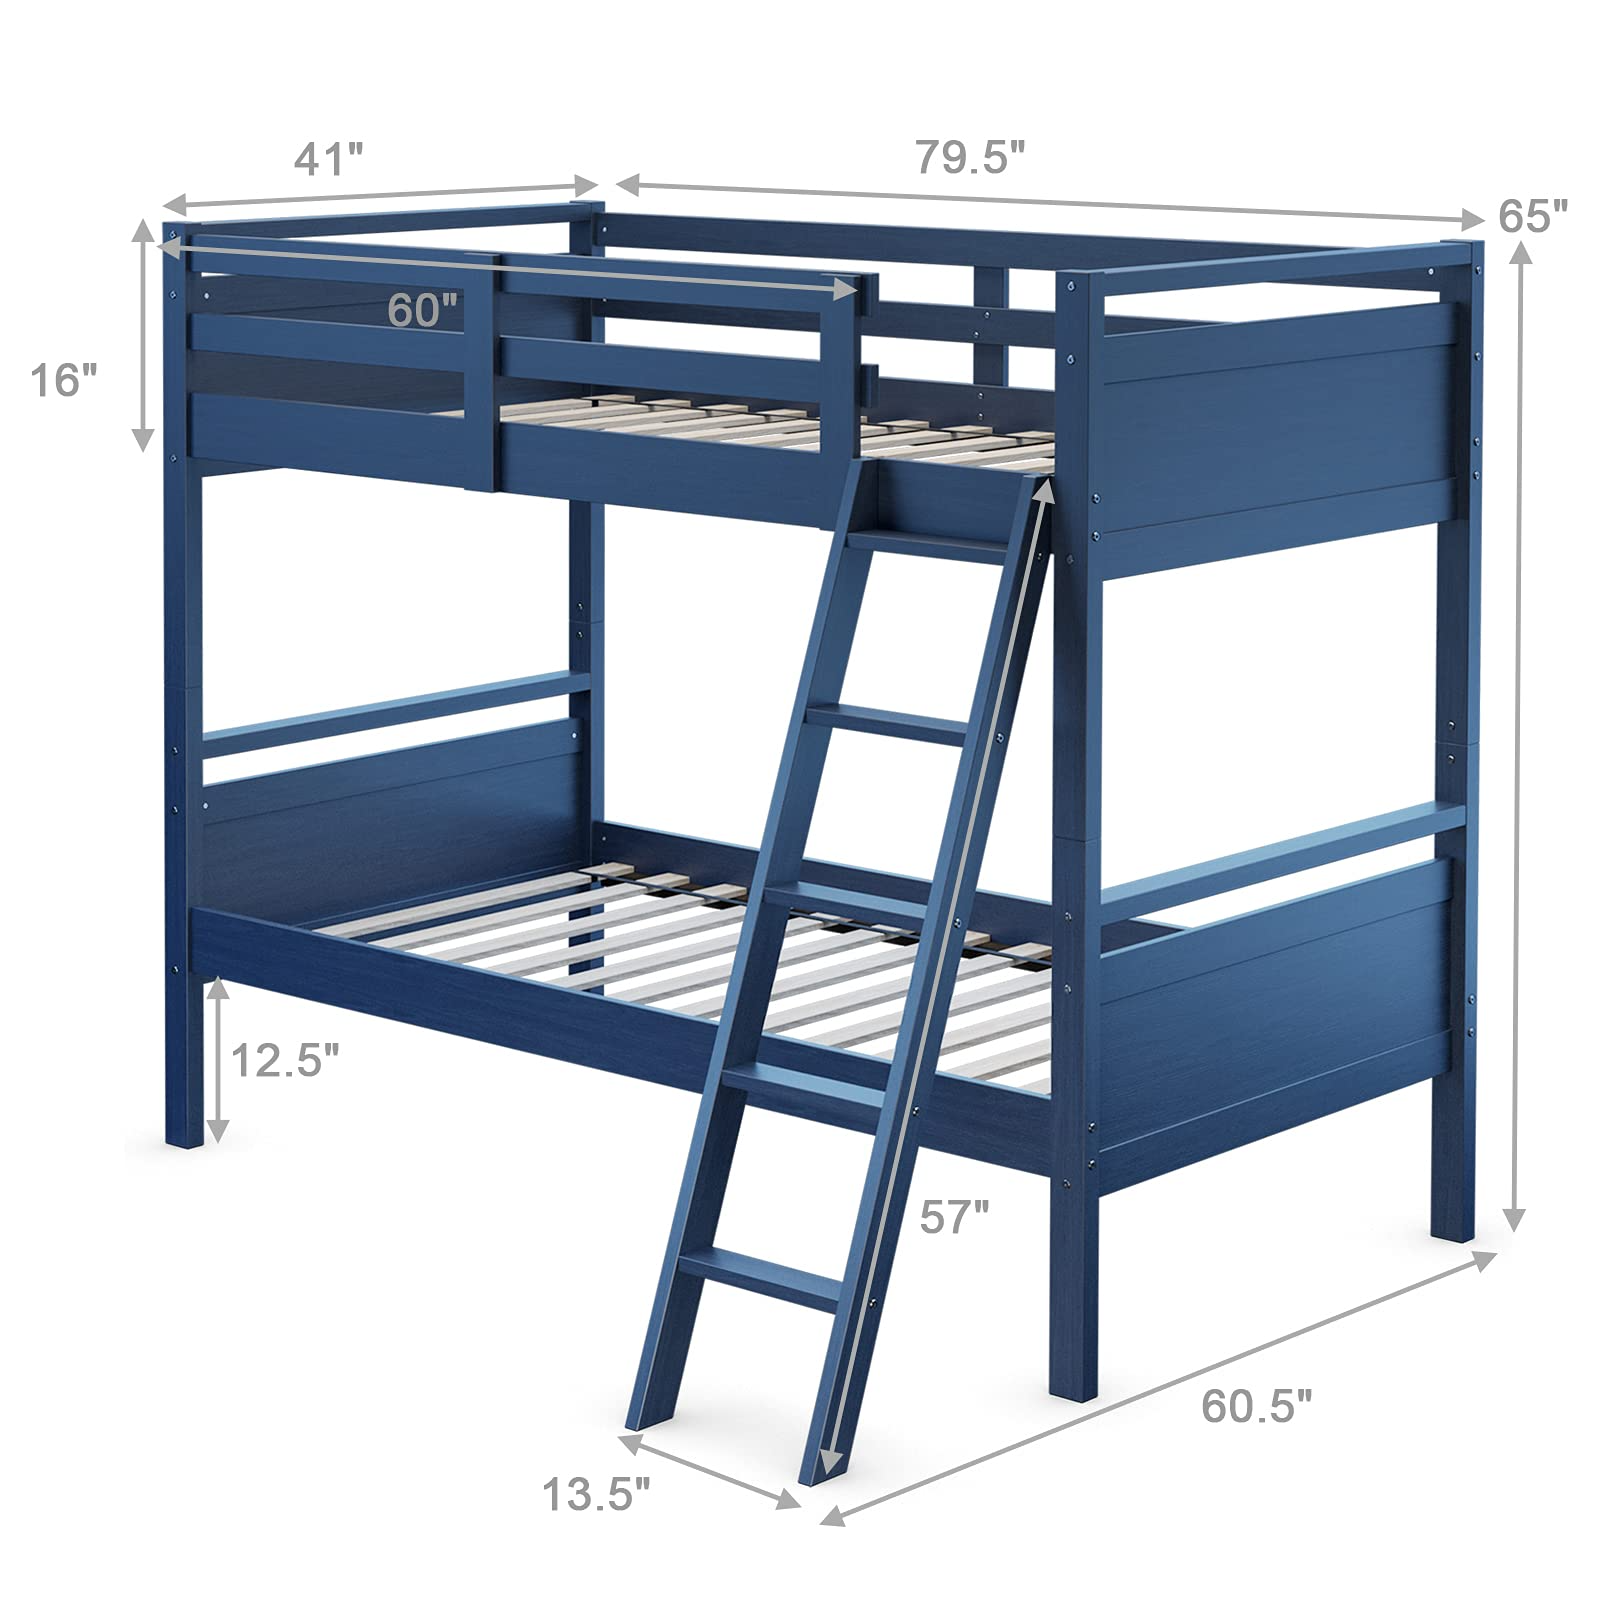 Giantex Twin Over Twin Bunk Bed, Solid Wood Twin Bunk Bed Convertible Into Two Individual Beds